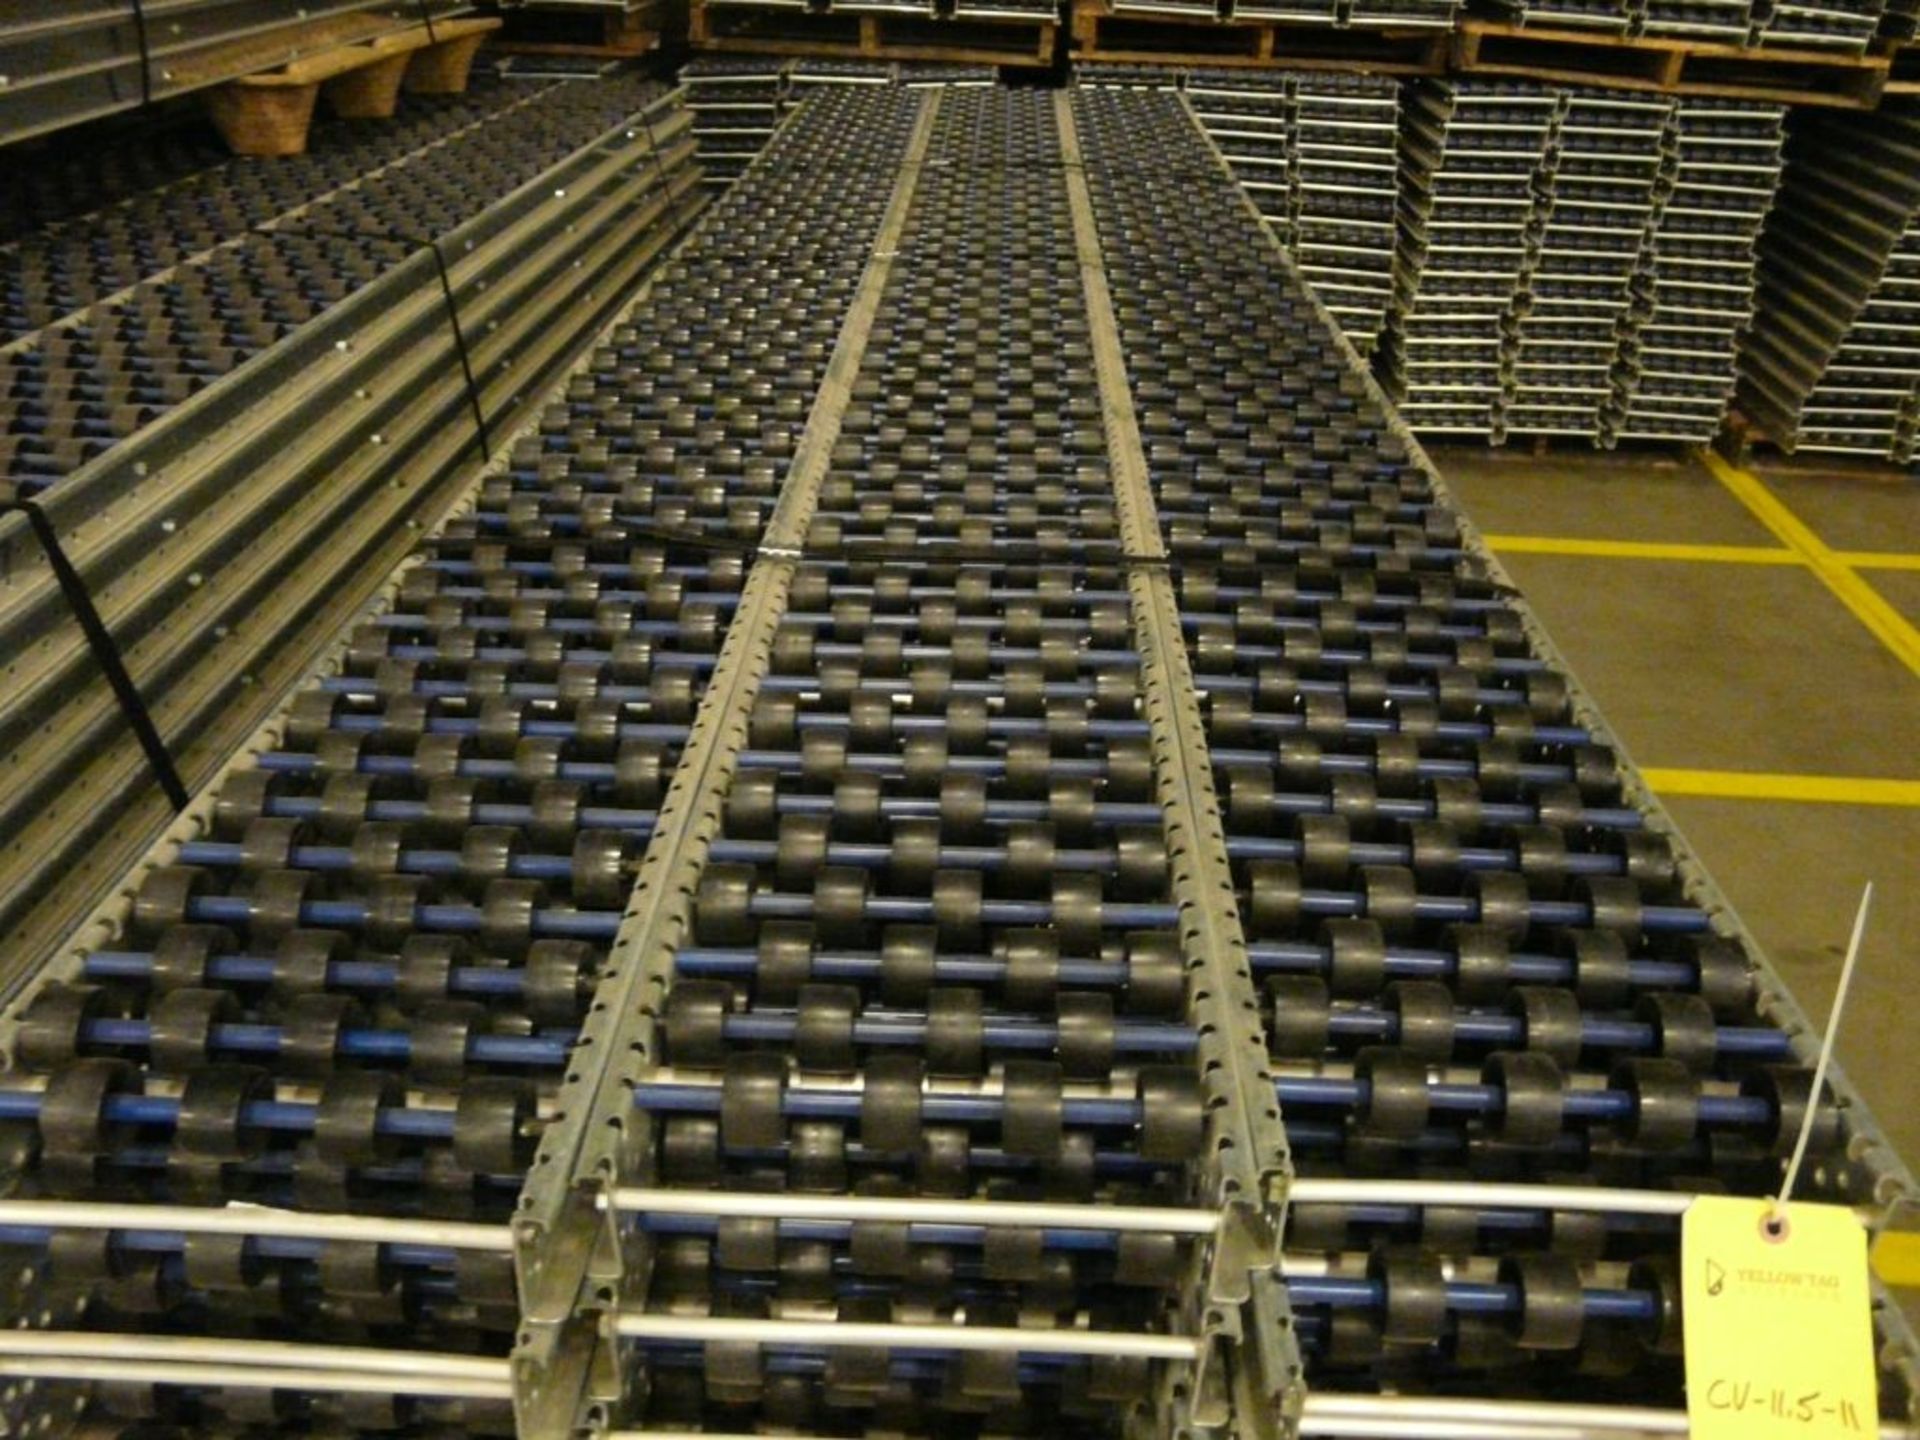 Lot of (90) SpanTrack Wheelbed Carton Flow Conveyors - 11.5'L x 11"W; Tag: 223593 - $30 Lot - Image 3 of 4